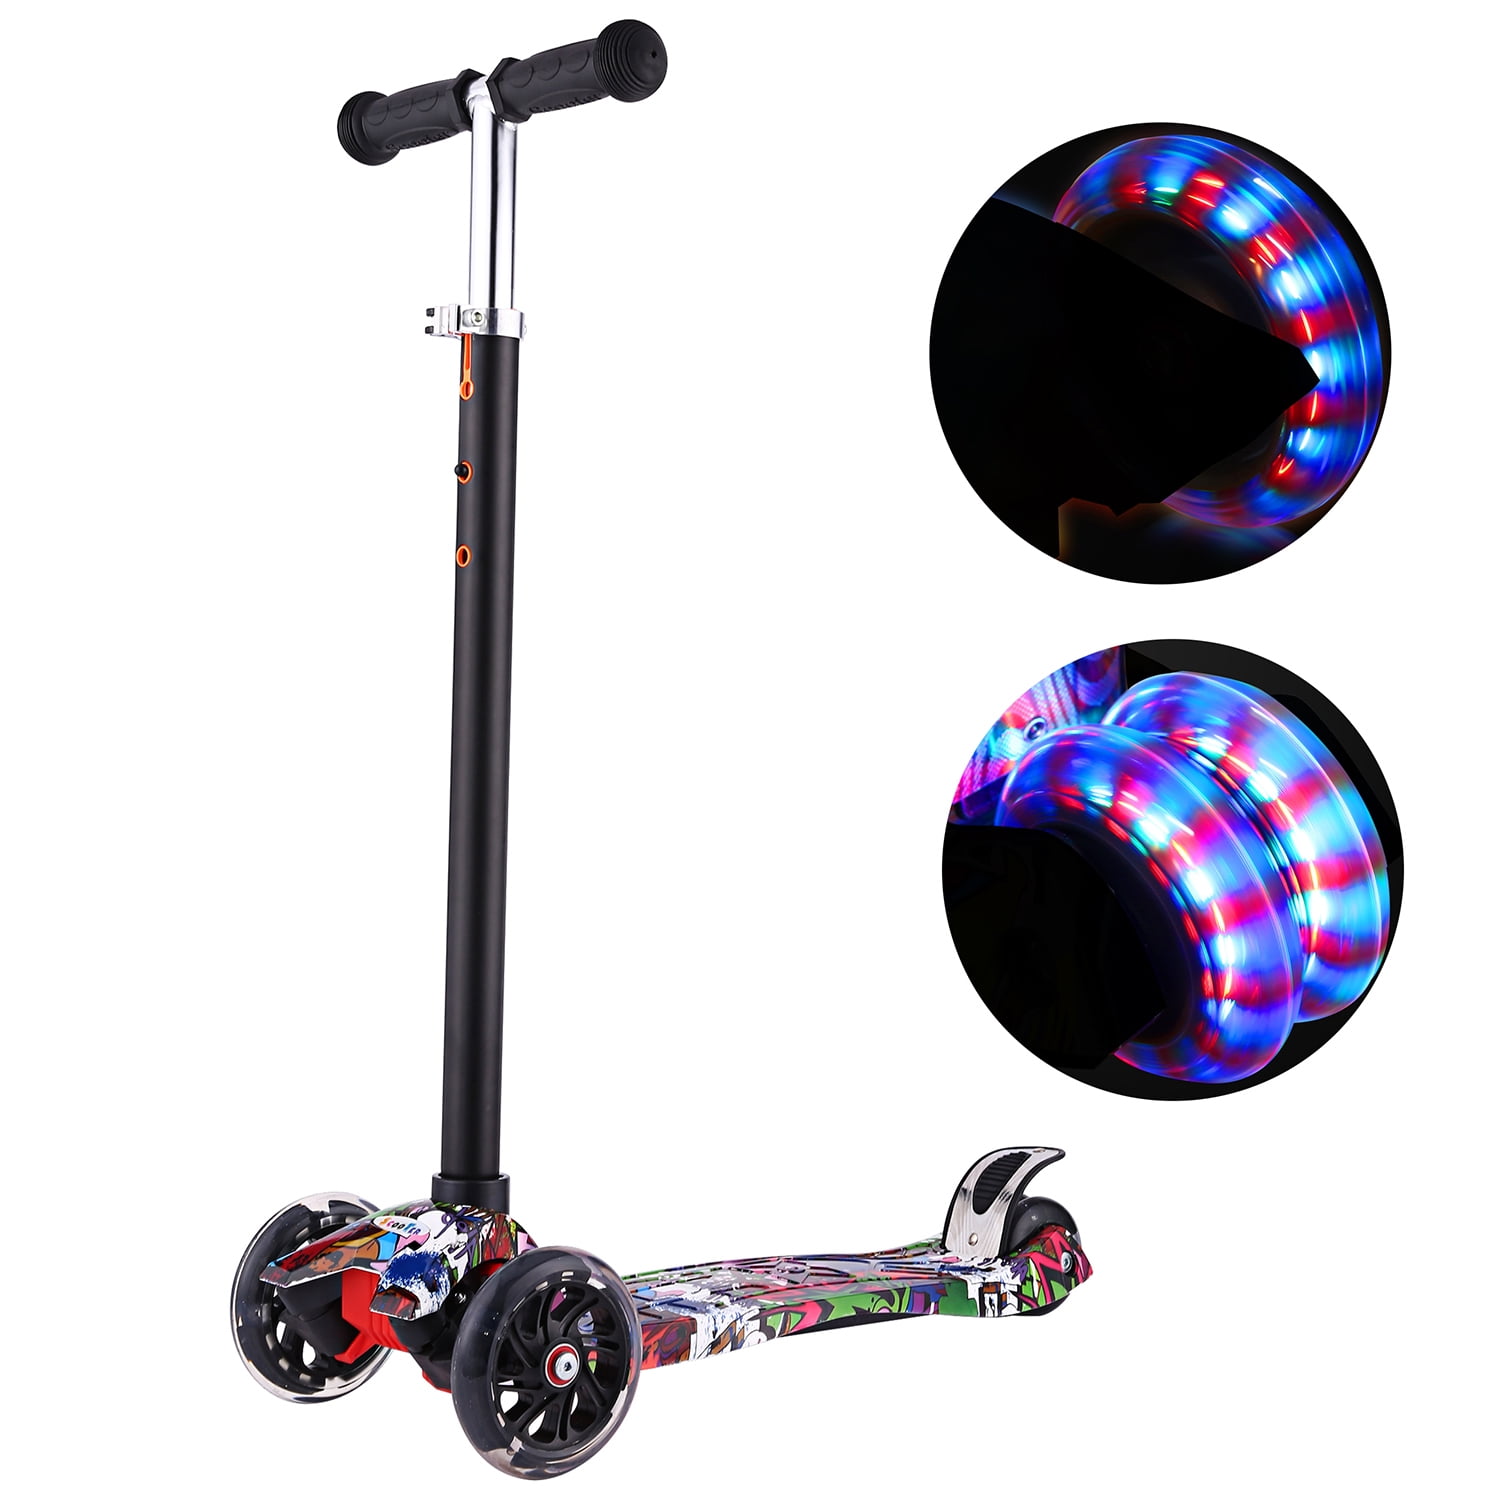 Hifashion Kick Scooter for Kids, Kids Scooter with 4 LED Light-Up Wheels, Adjustable Height